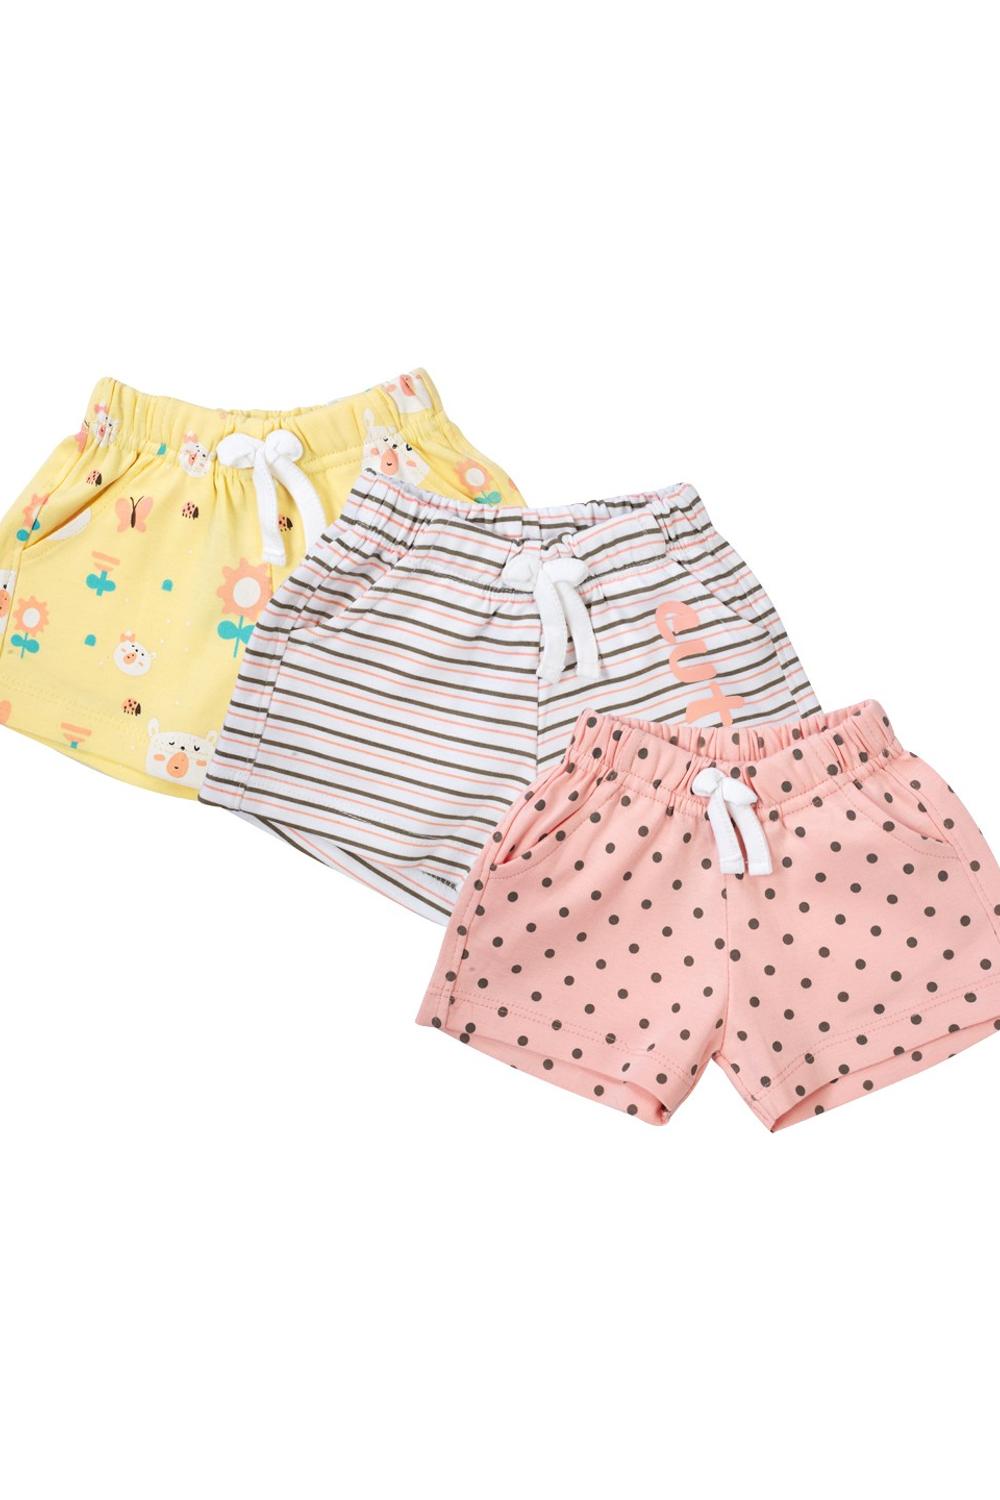 Mee Mee Shorts Pack of 3 -Pink & Yellow & White